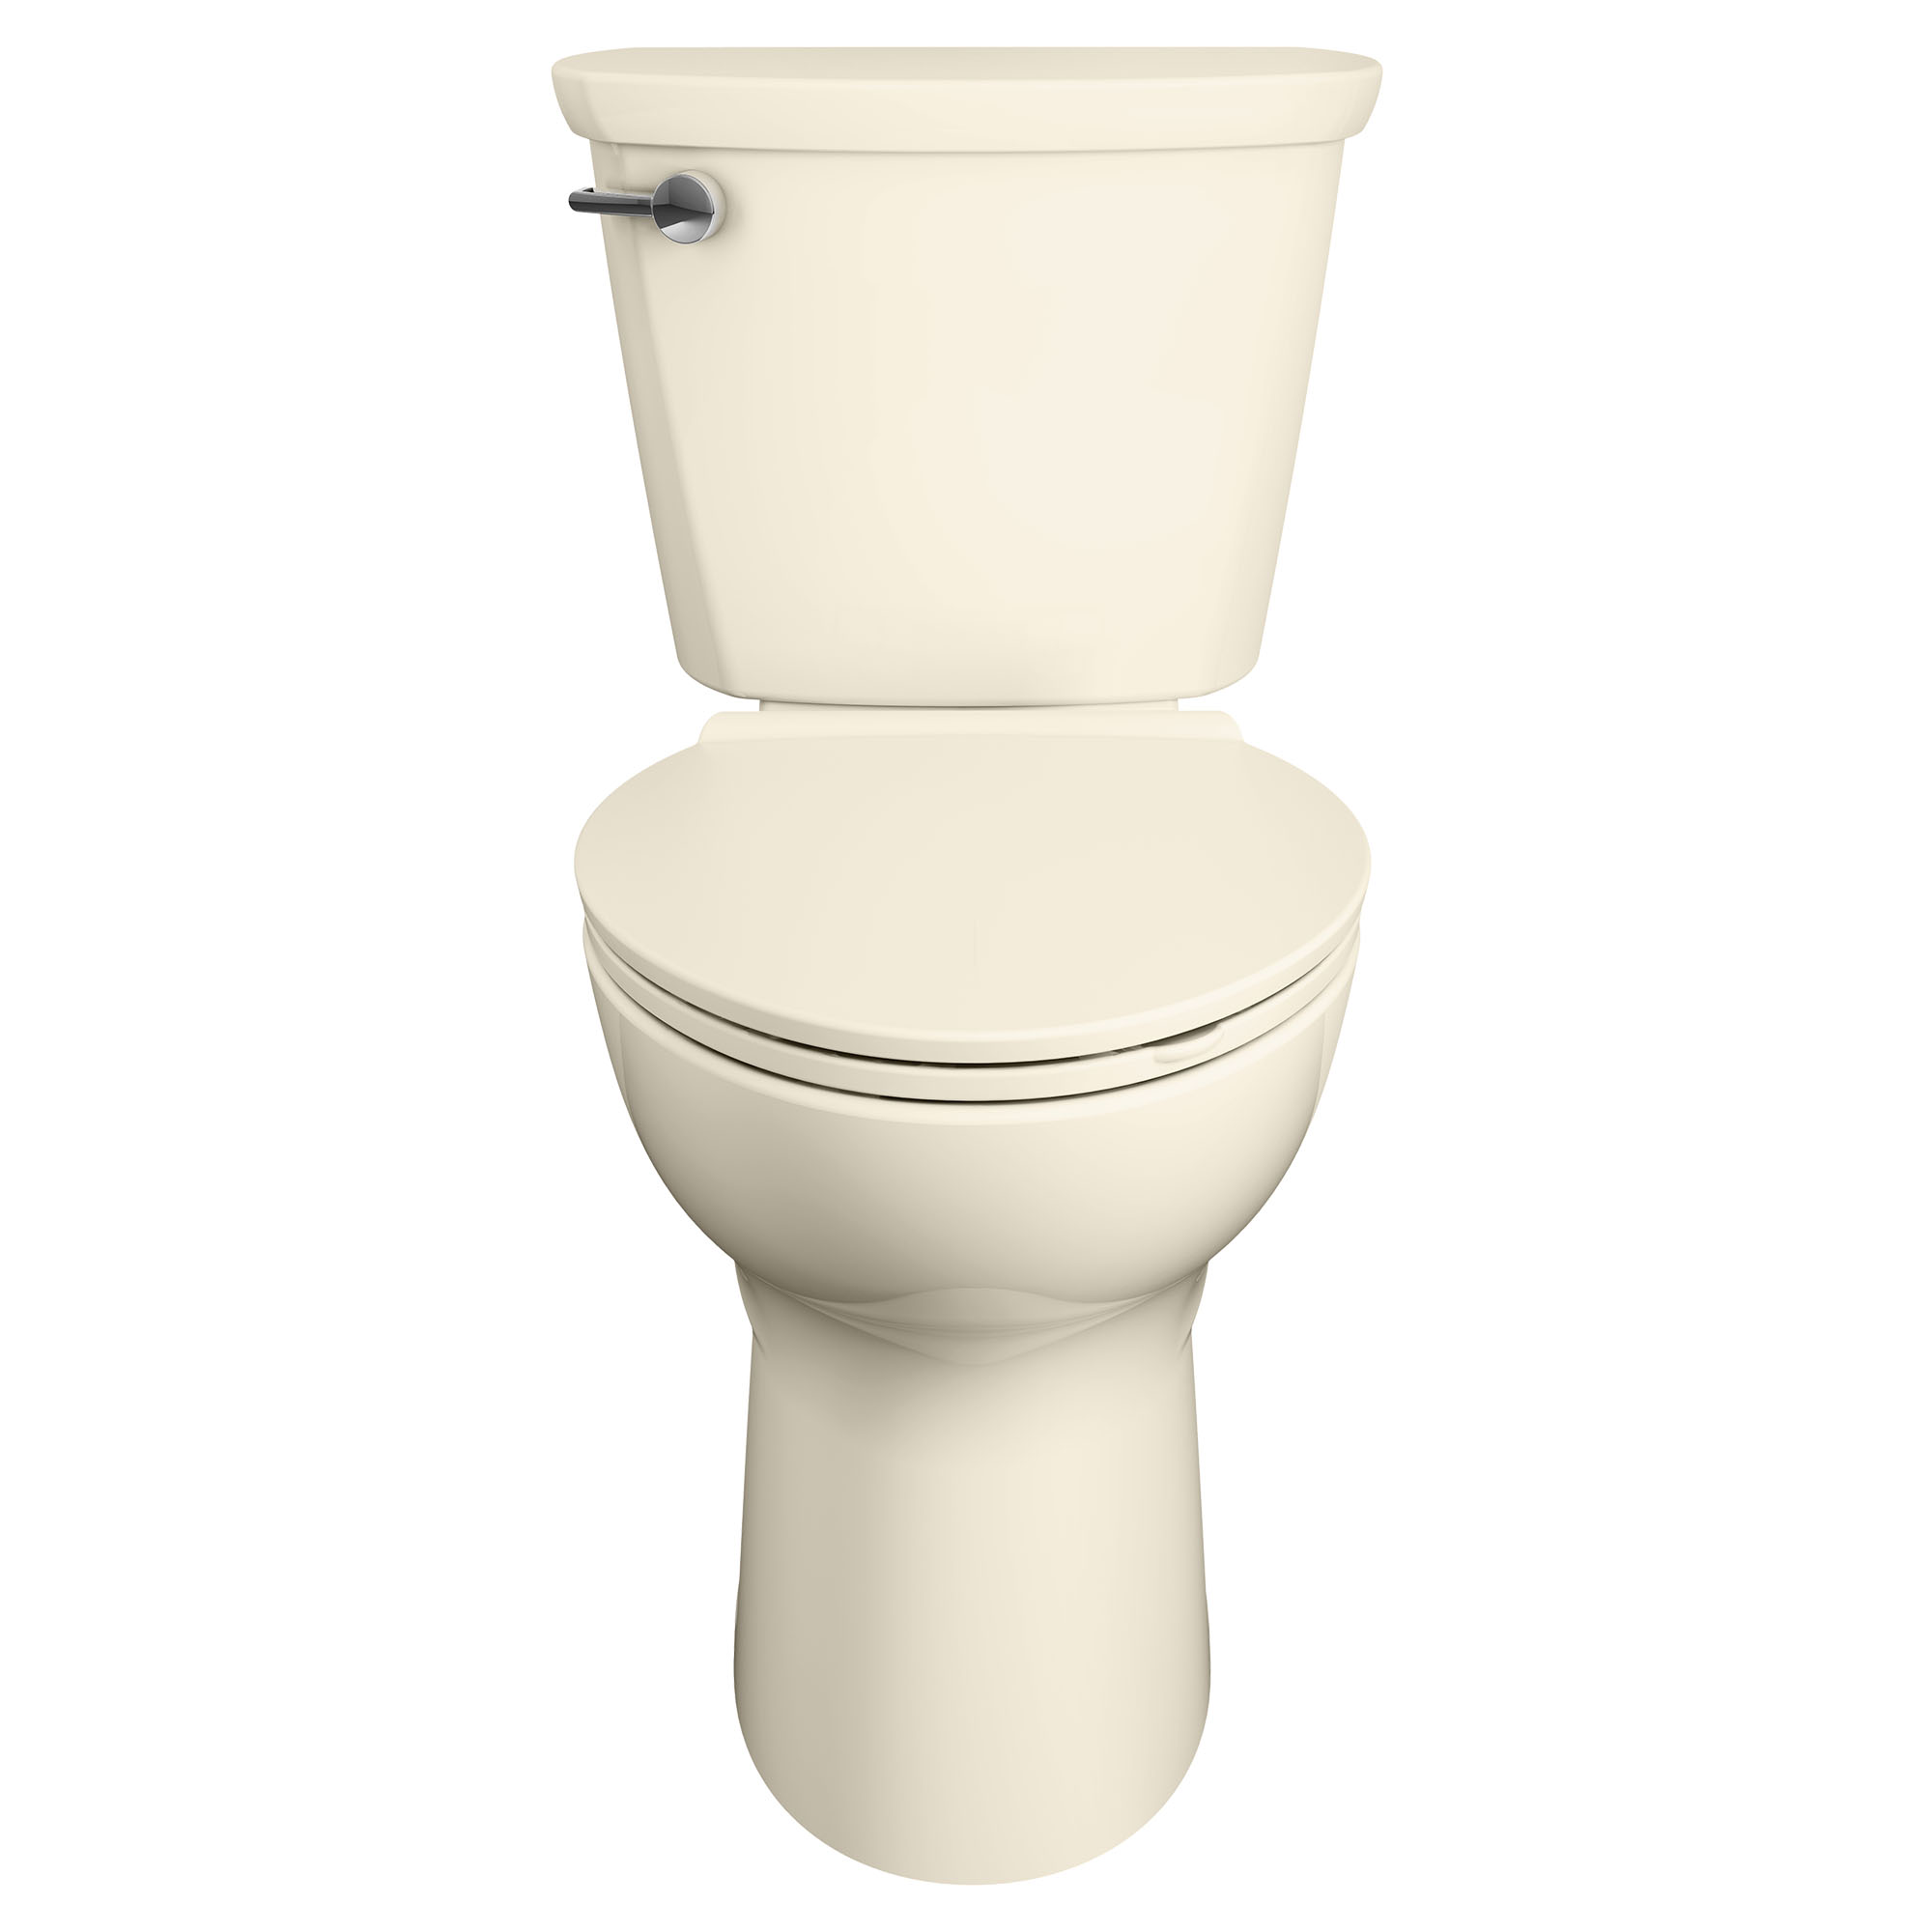 Cadet™ PRO Two-Piece 1.28 gpf/4.8 Lpf Compact Chair Height Elongated 14-Inch Rough Toilet Less Seat